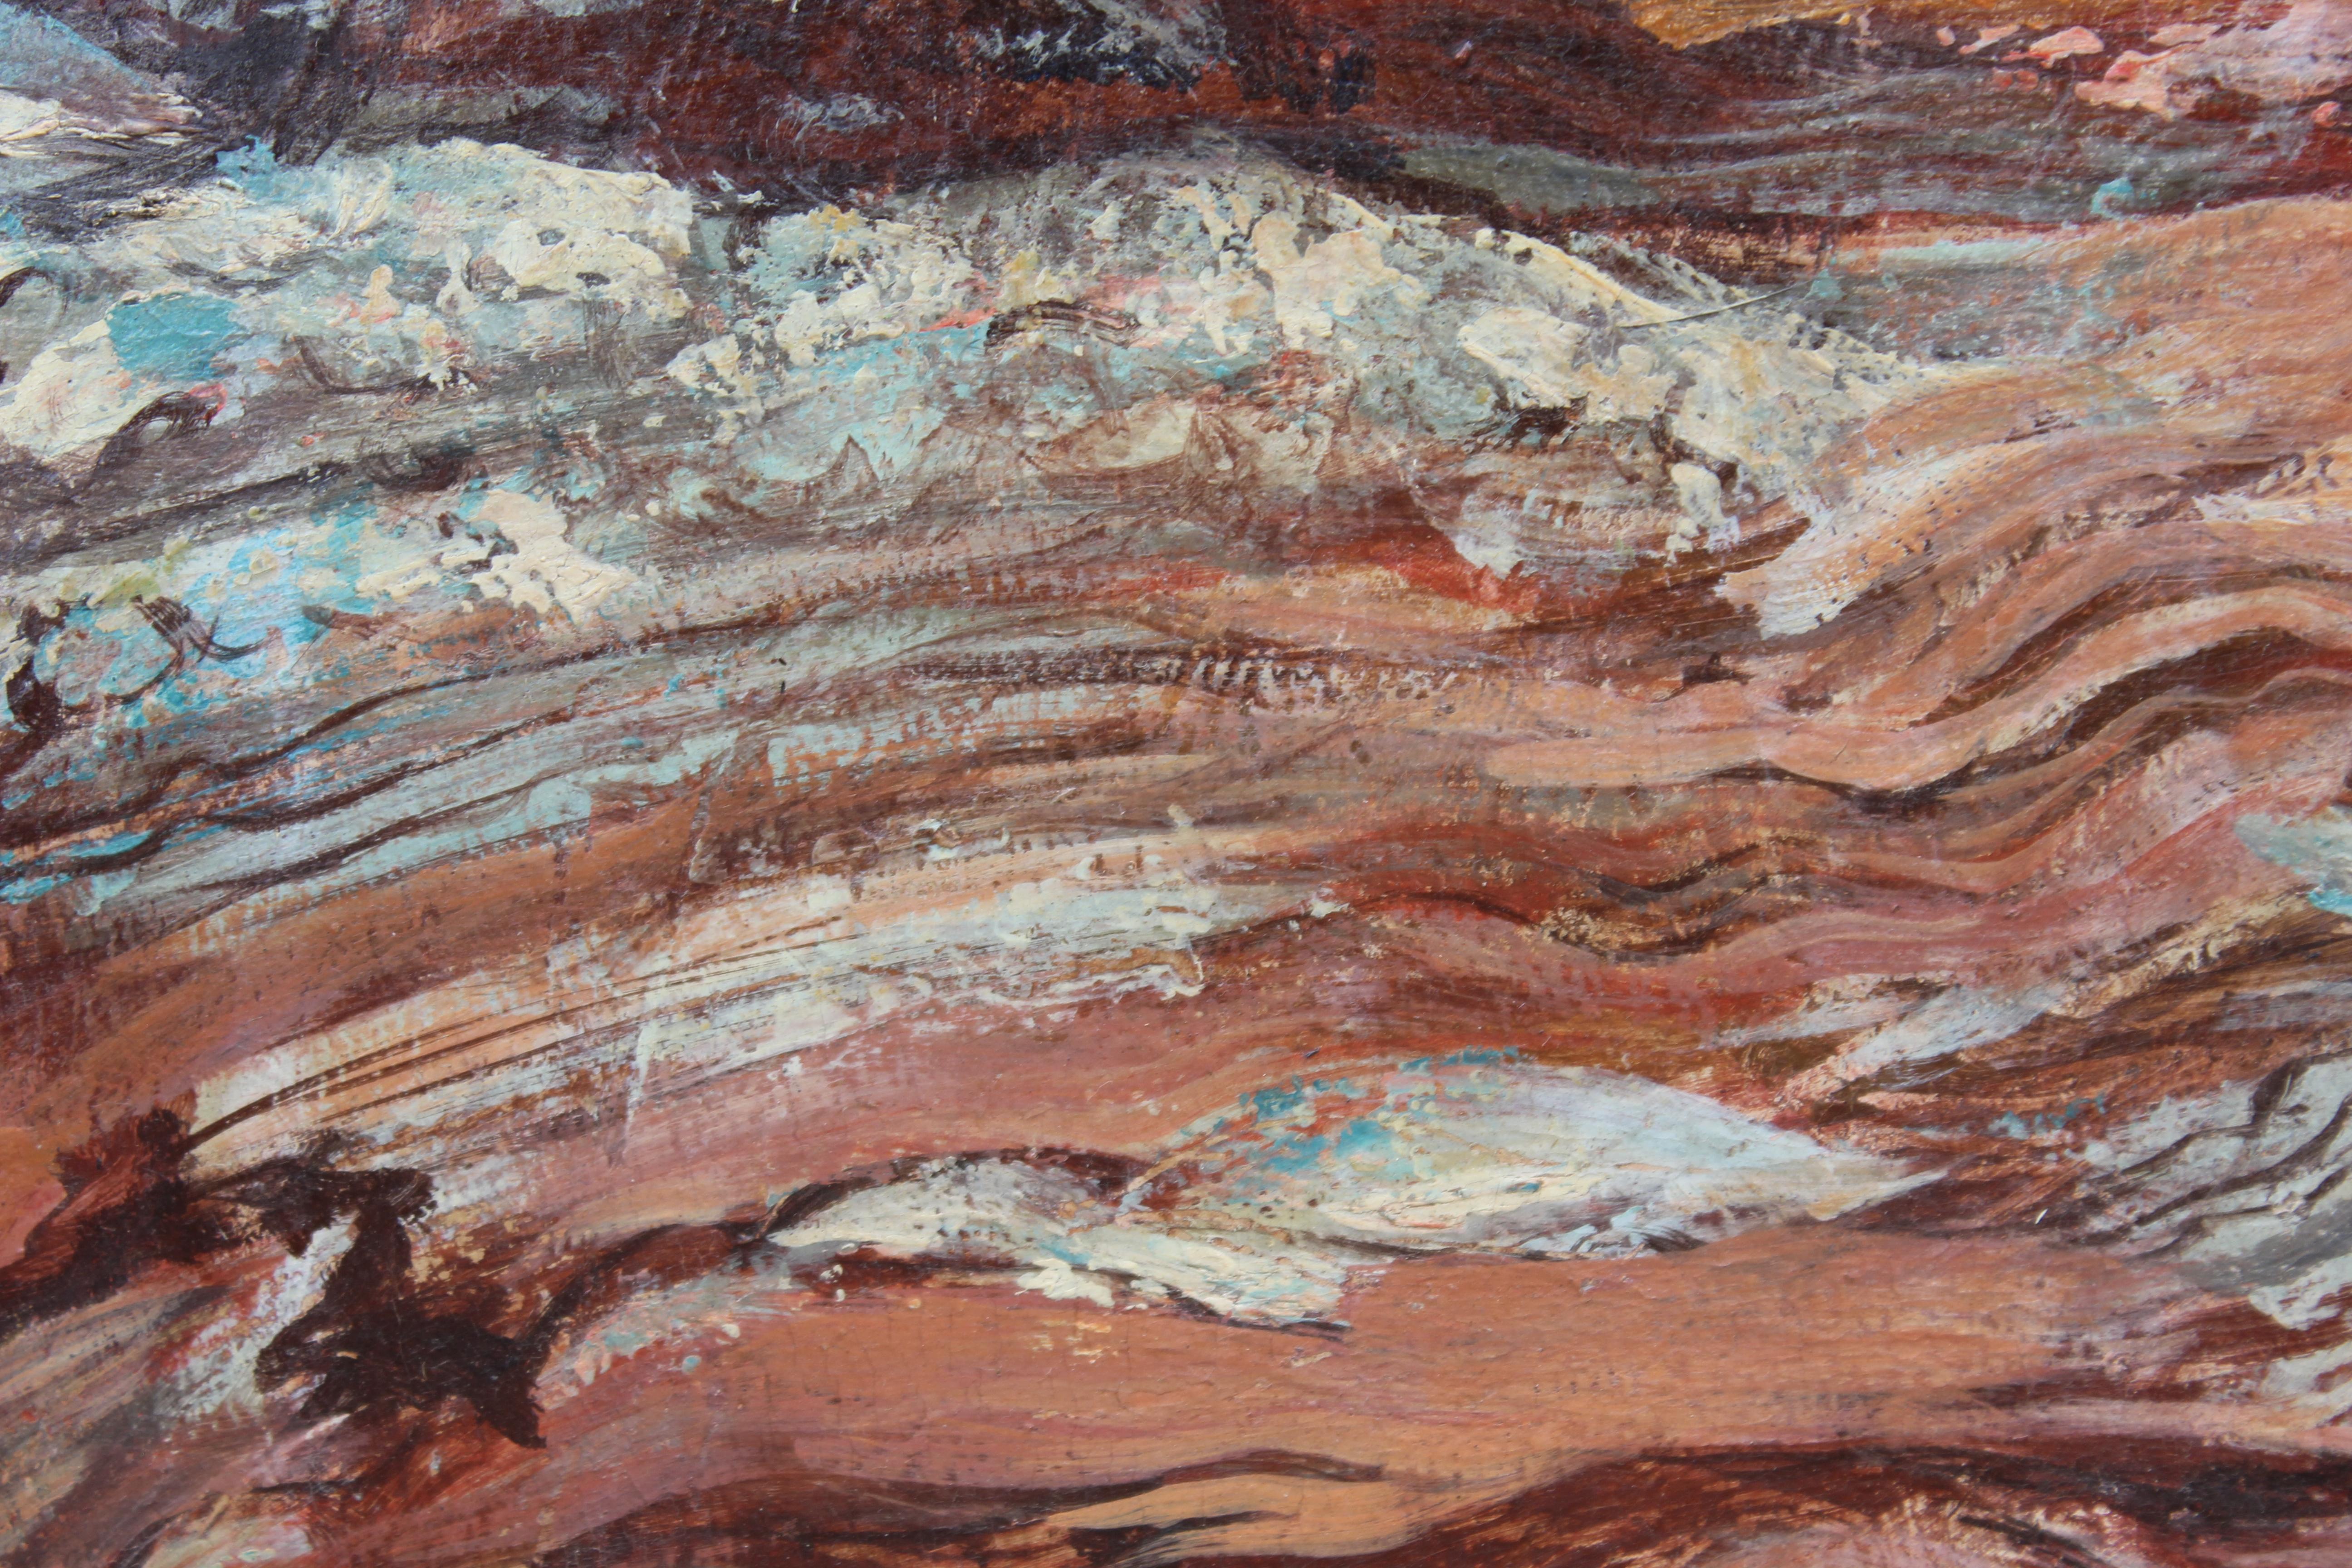 Gorgeous oil painting of sedimentary rocks forming layered strata in a desert scene done in red tones by George Shackelford. Signed in the lower corner. Additional artist information on reverse. Framed in complimentary brown wooden frame.